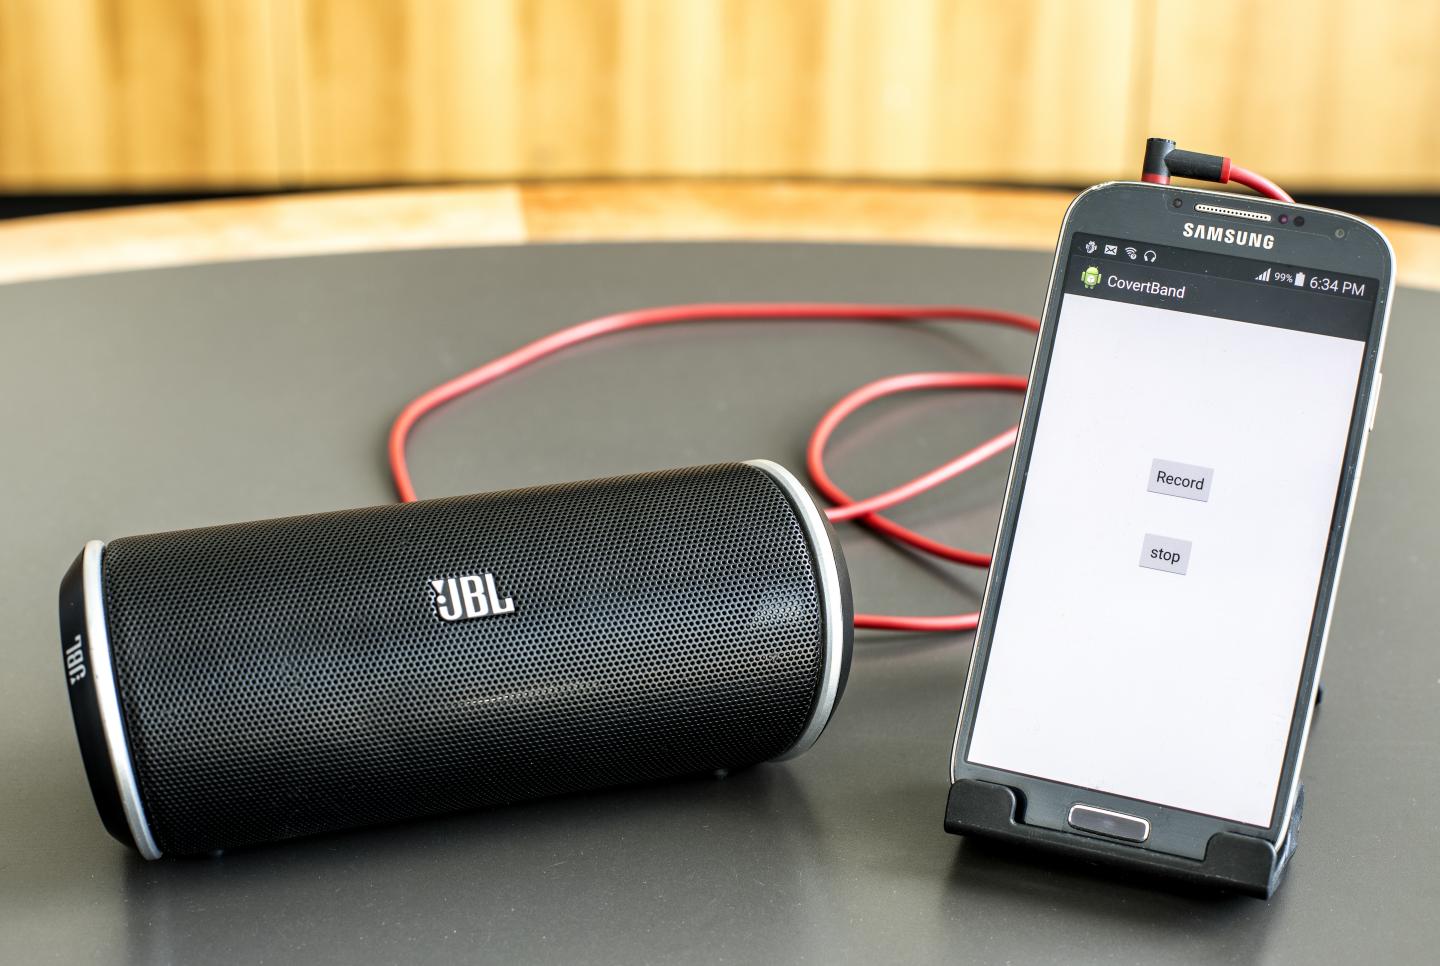 The researchers tested CovertBand using a Samsung Galaxy S4 smartphone hooked up to a portable speaker. (Dennis Wise/University of Washington)